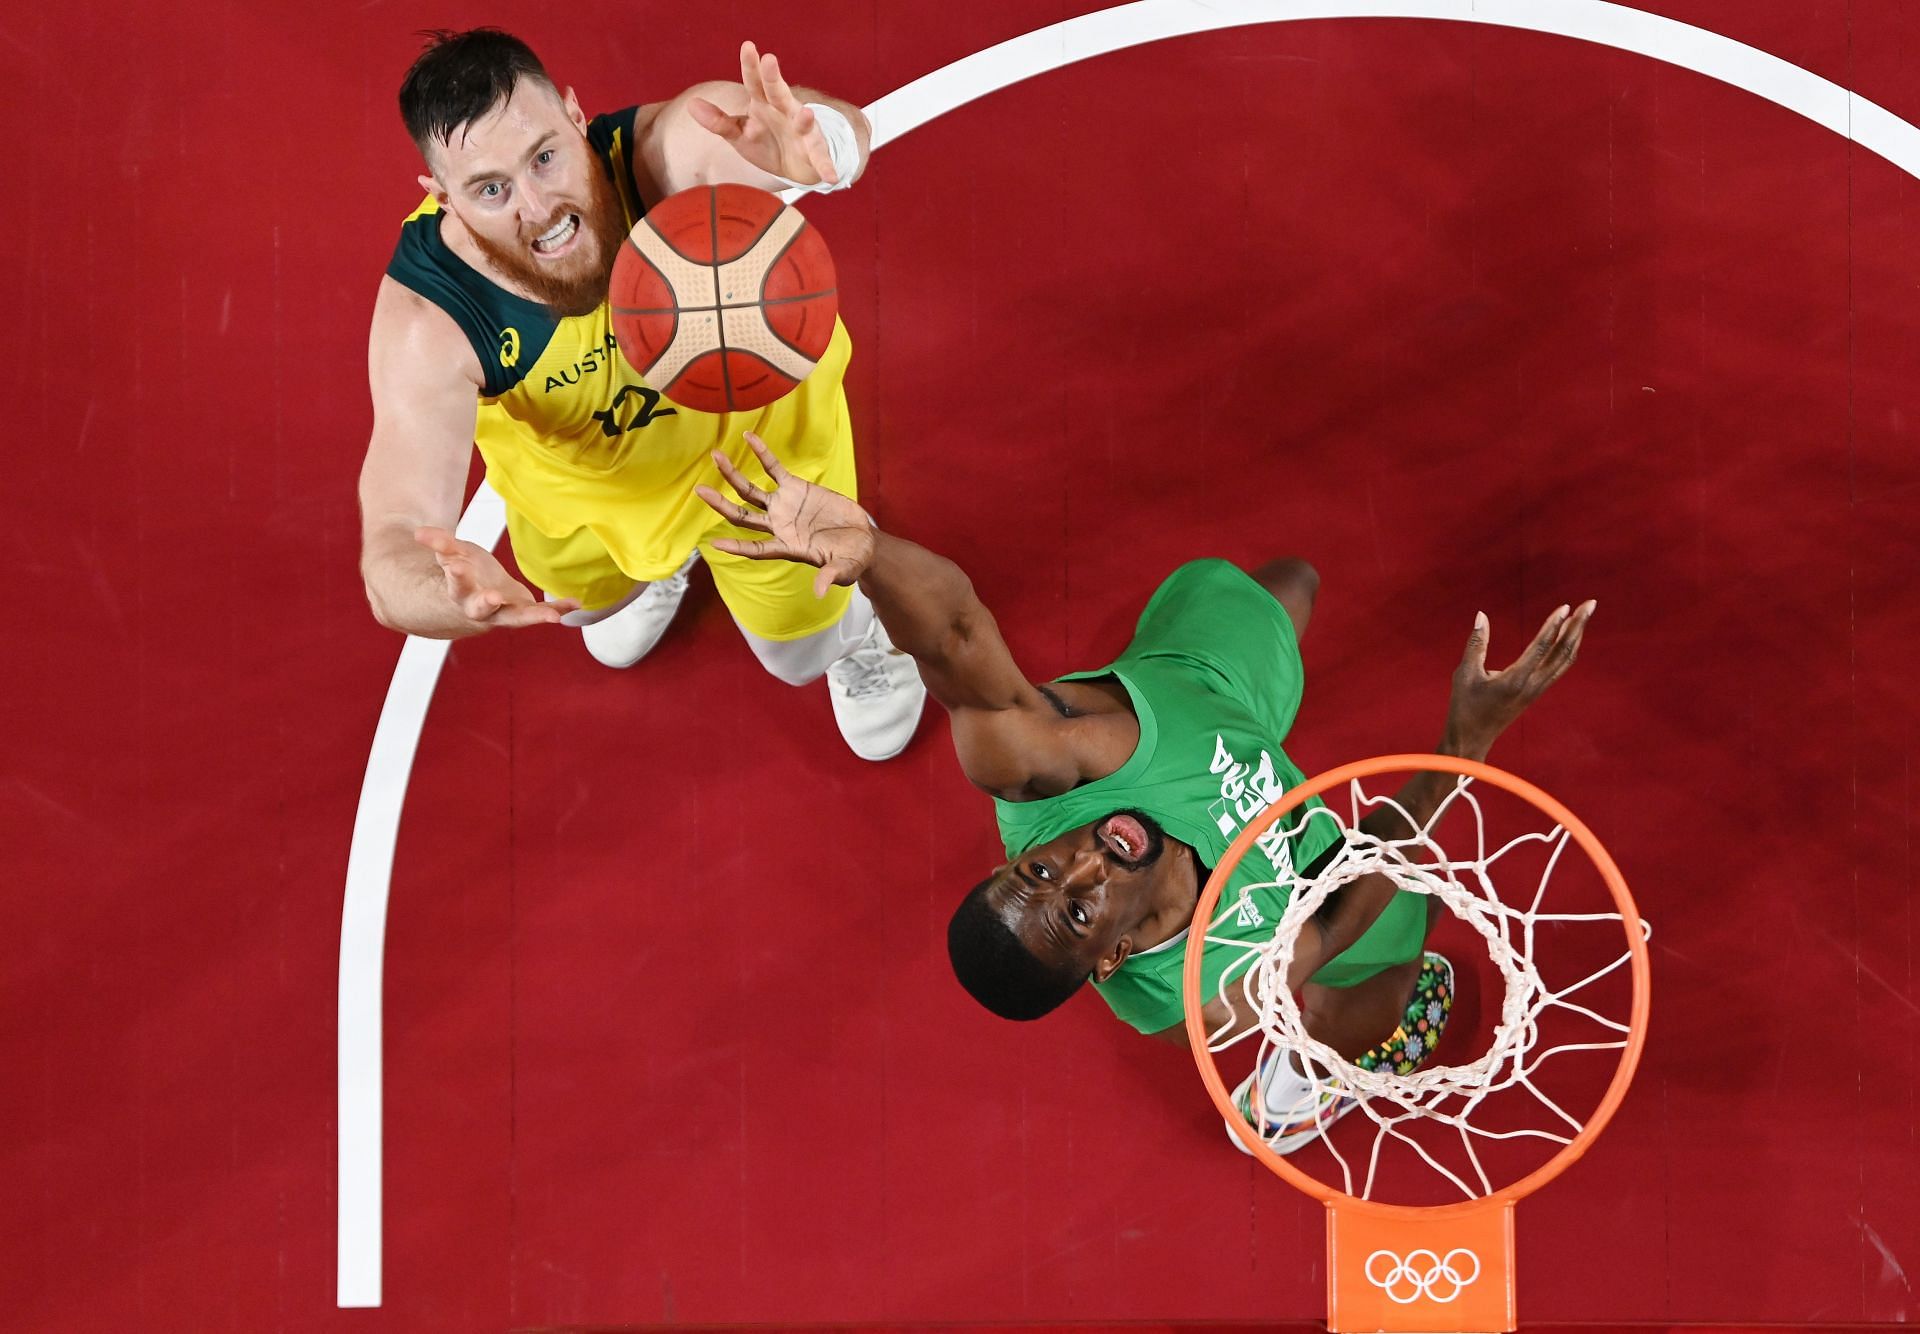 Former NBA veteran Aron Baynes while playing for Australia in the Olympics